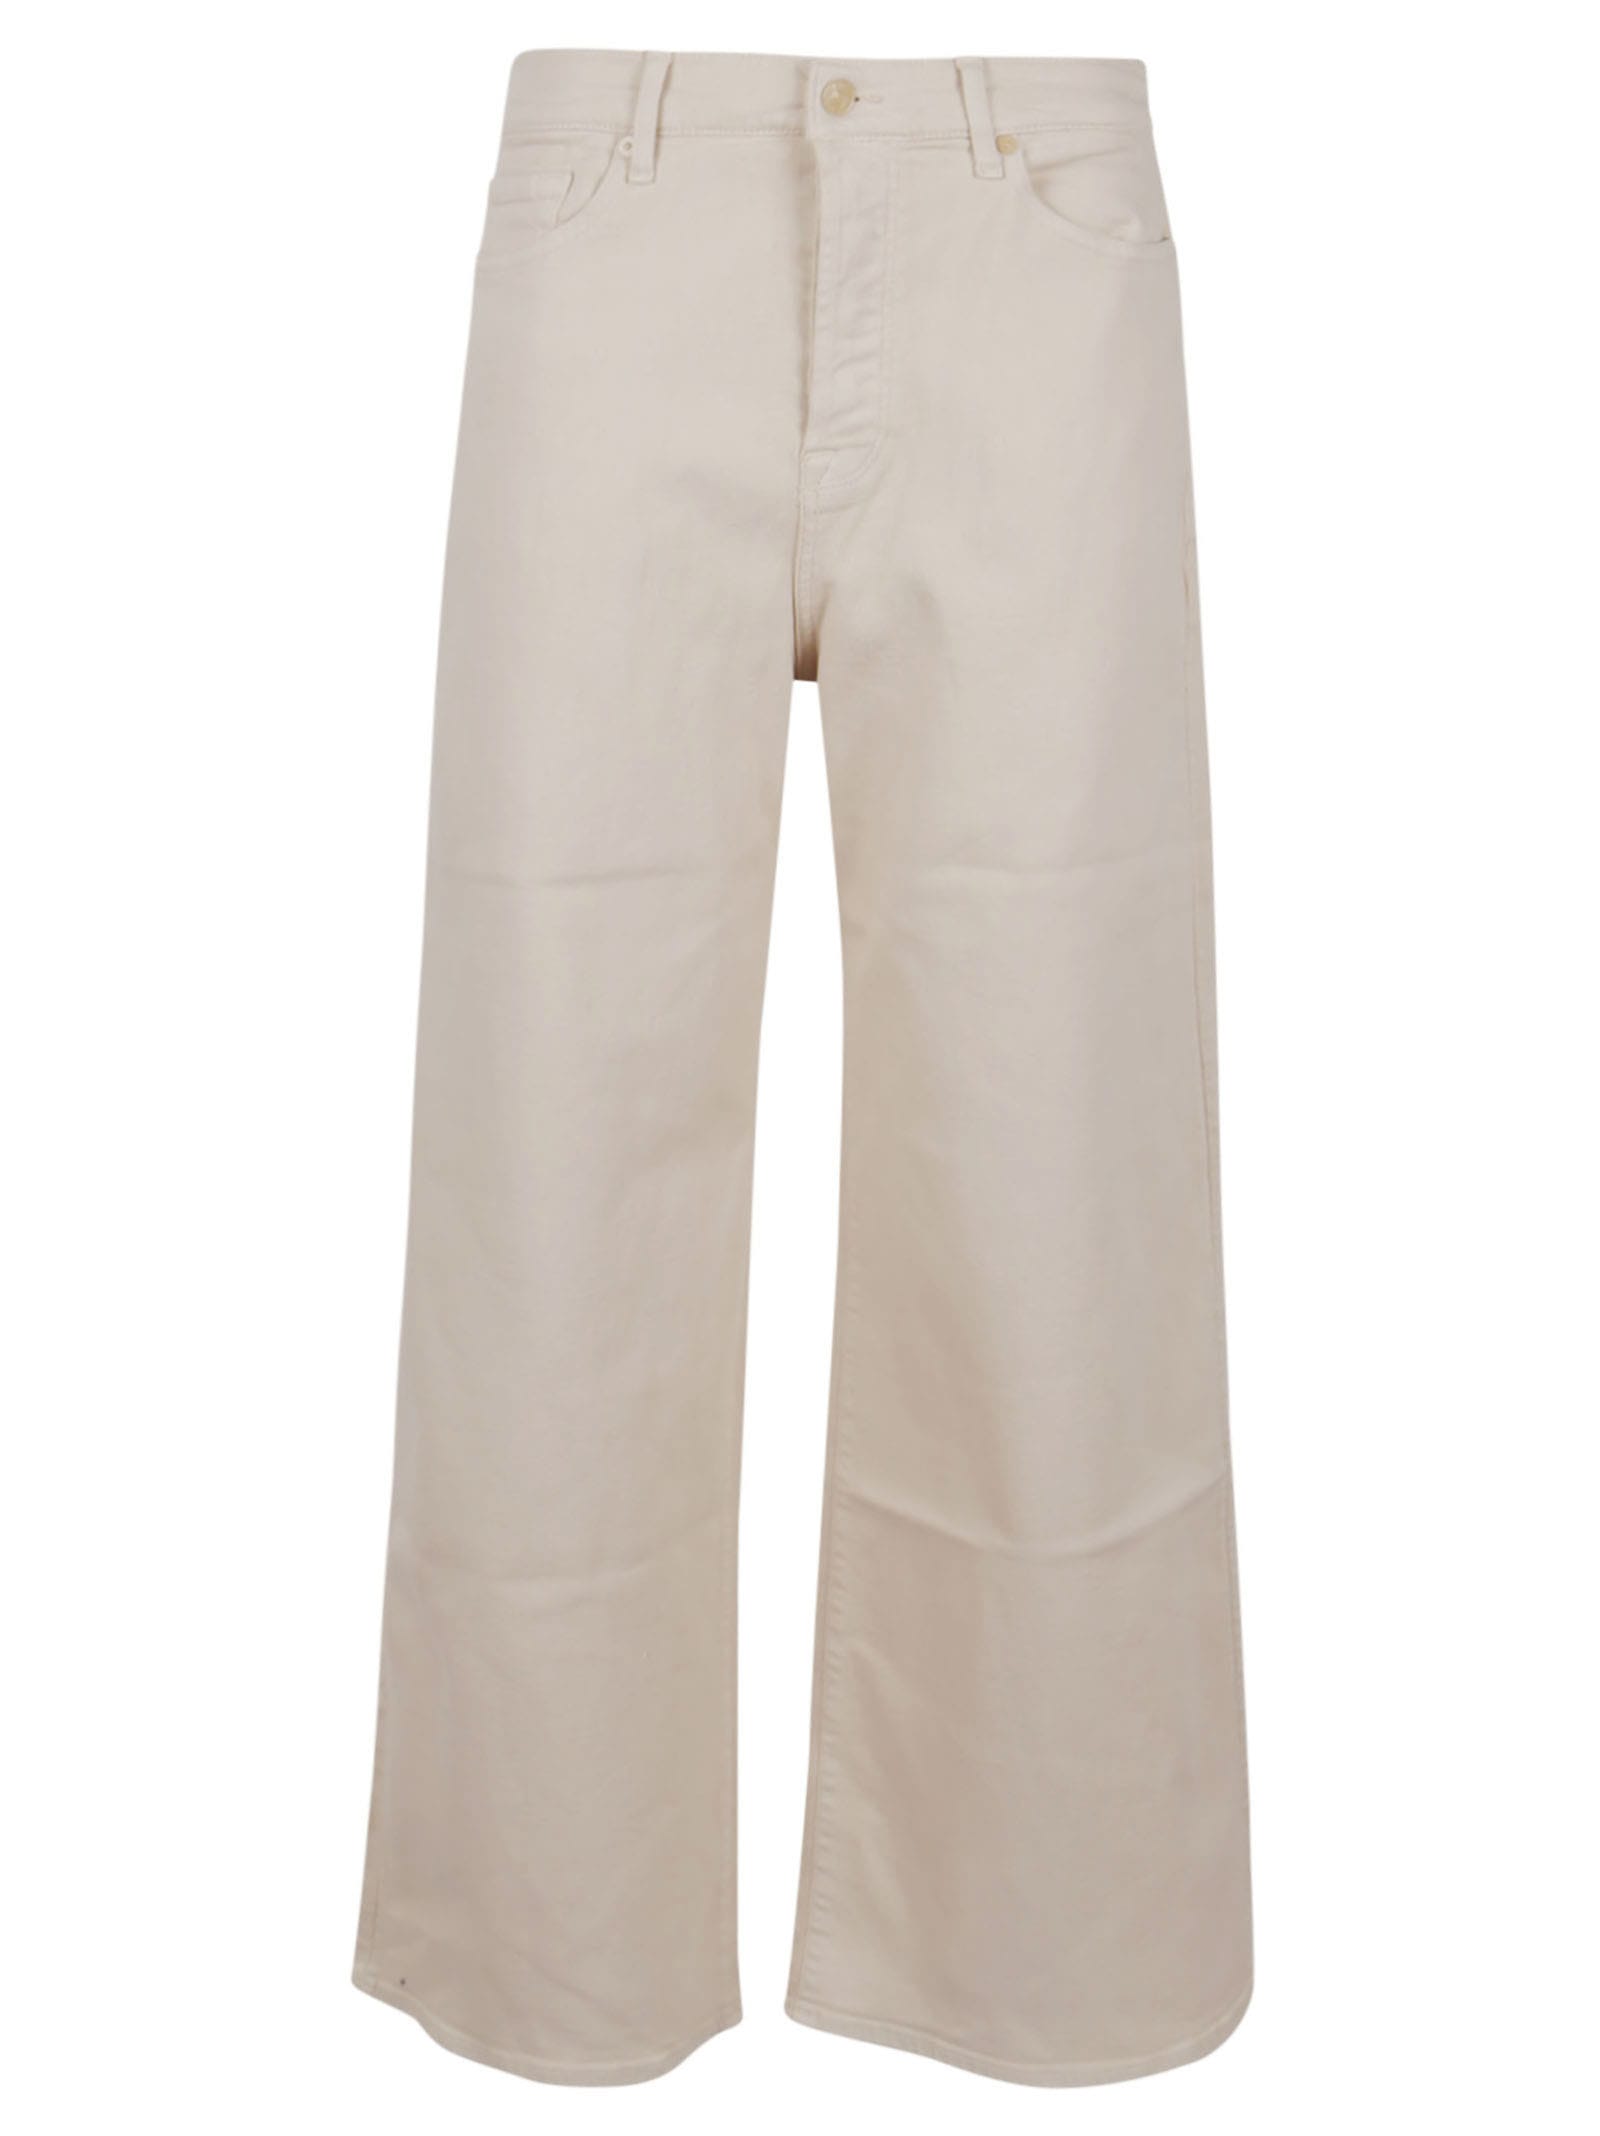 7 For All Mankind Zoey Luxe Vintage Winter White